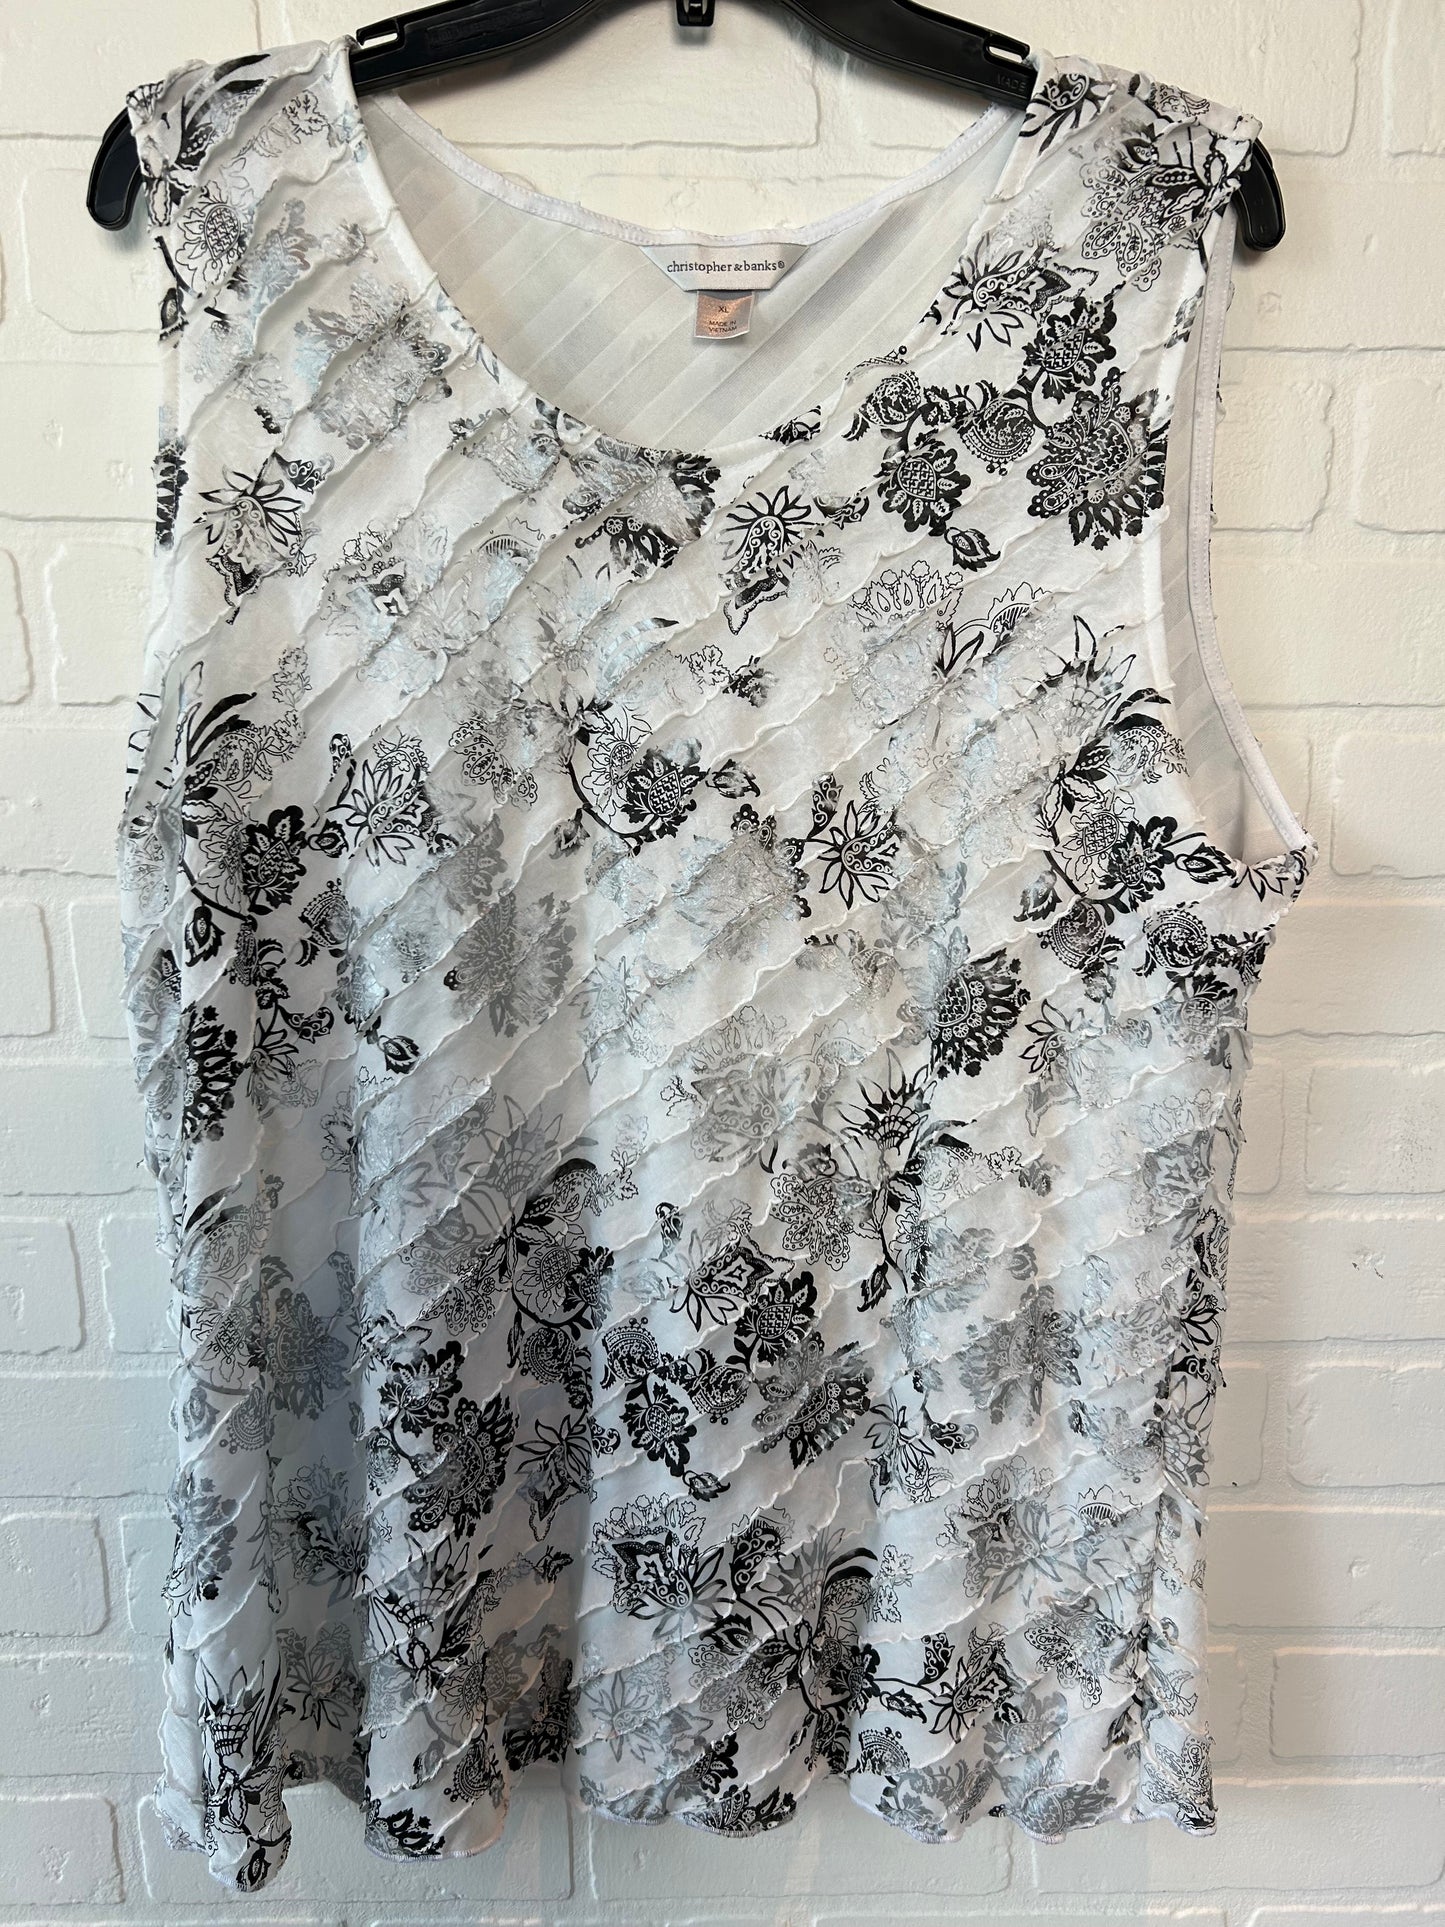 Black & White Top Sleeveless Christopher And Banks, Size Xl